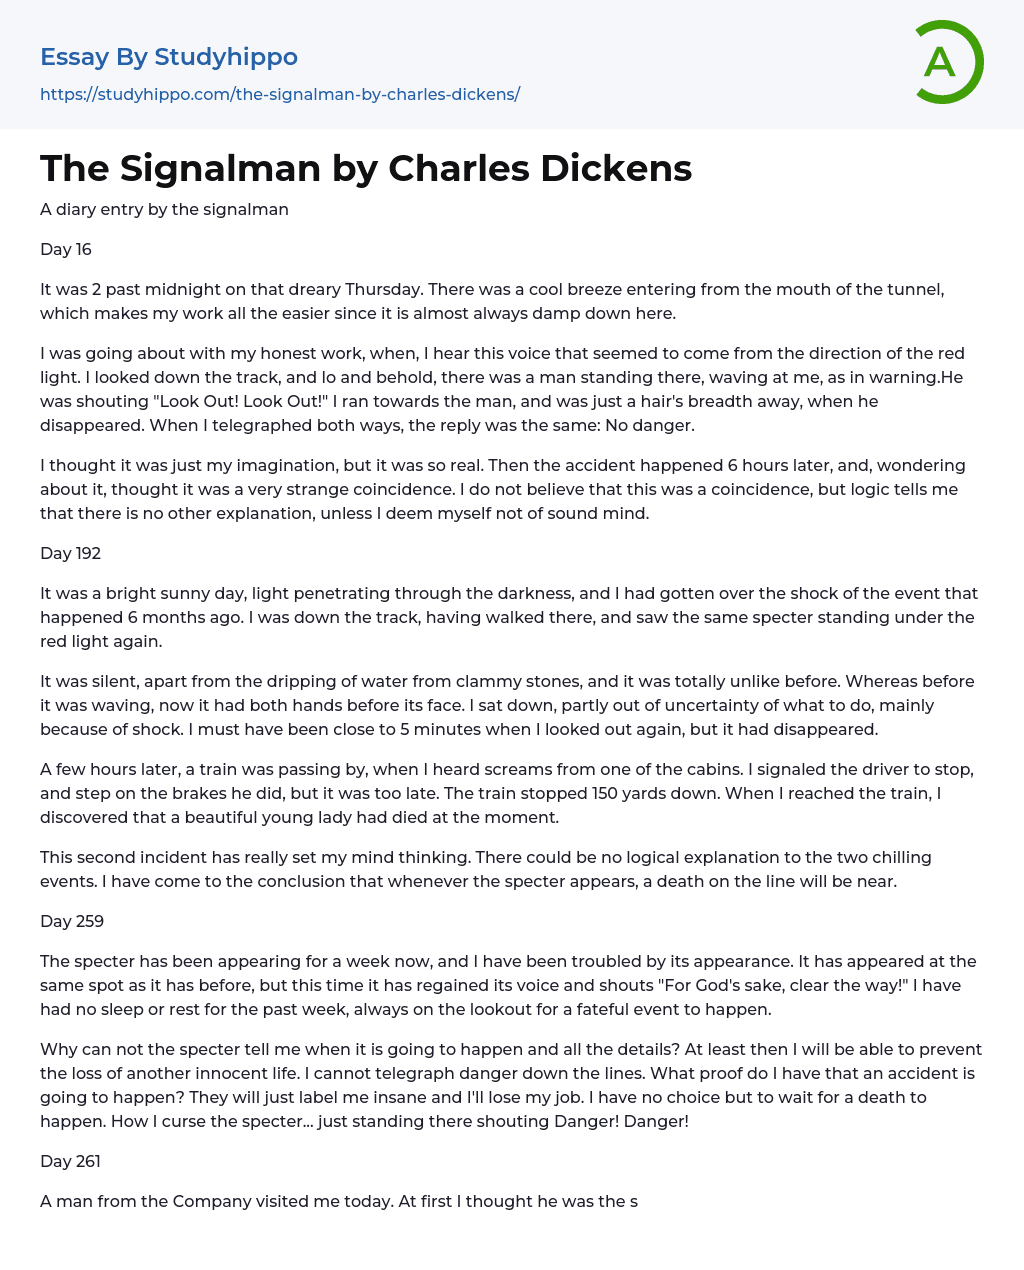 The Signalman by Charles Dickens Essay Example